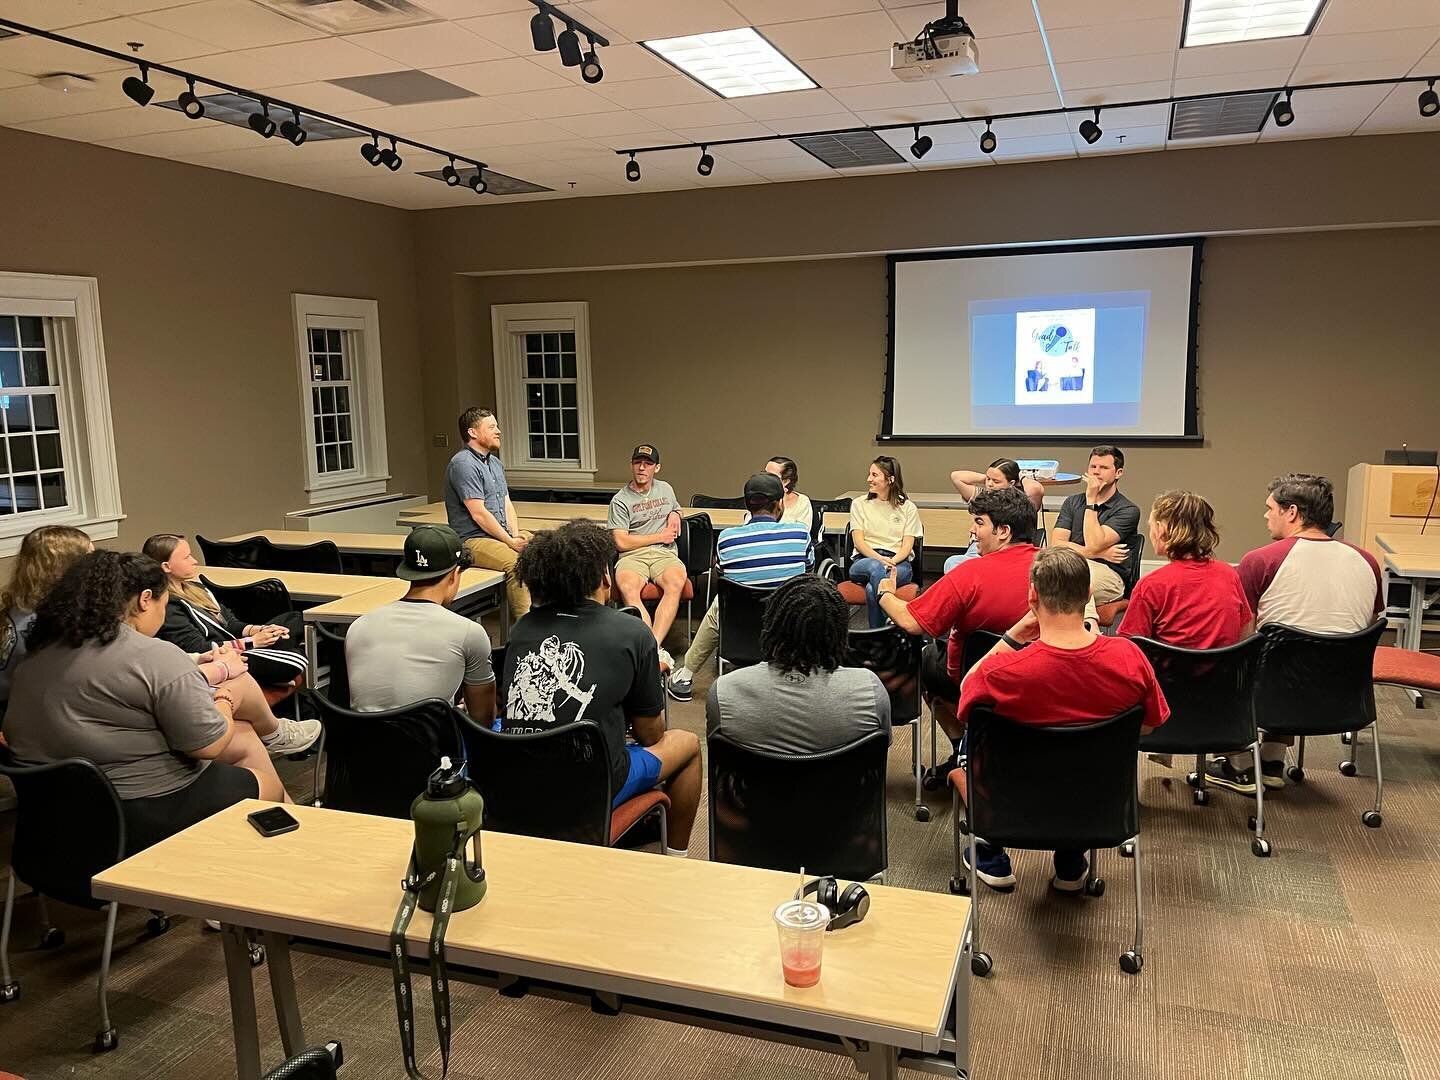 This past week at our meeting we had a group of students from the Greensboro fellows come and speak to our group about life after college, and how you can/have to ingrate faith into it as well. Great questions were asked and everyone was able to take